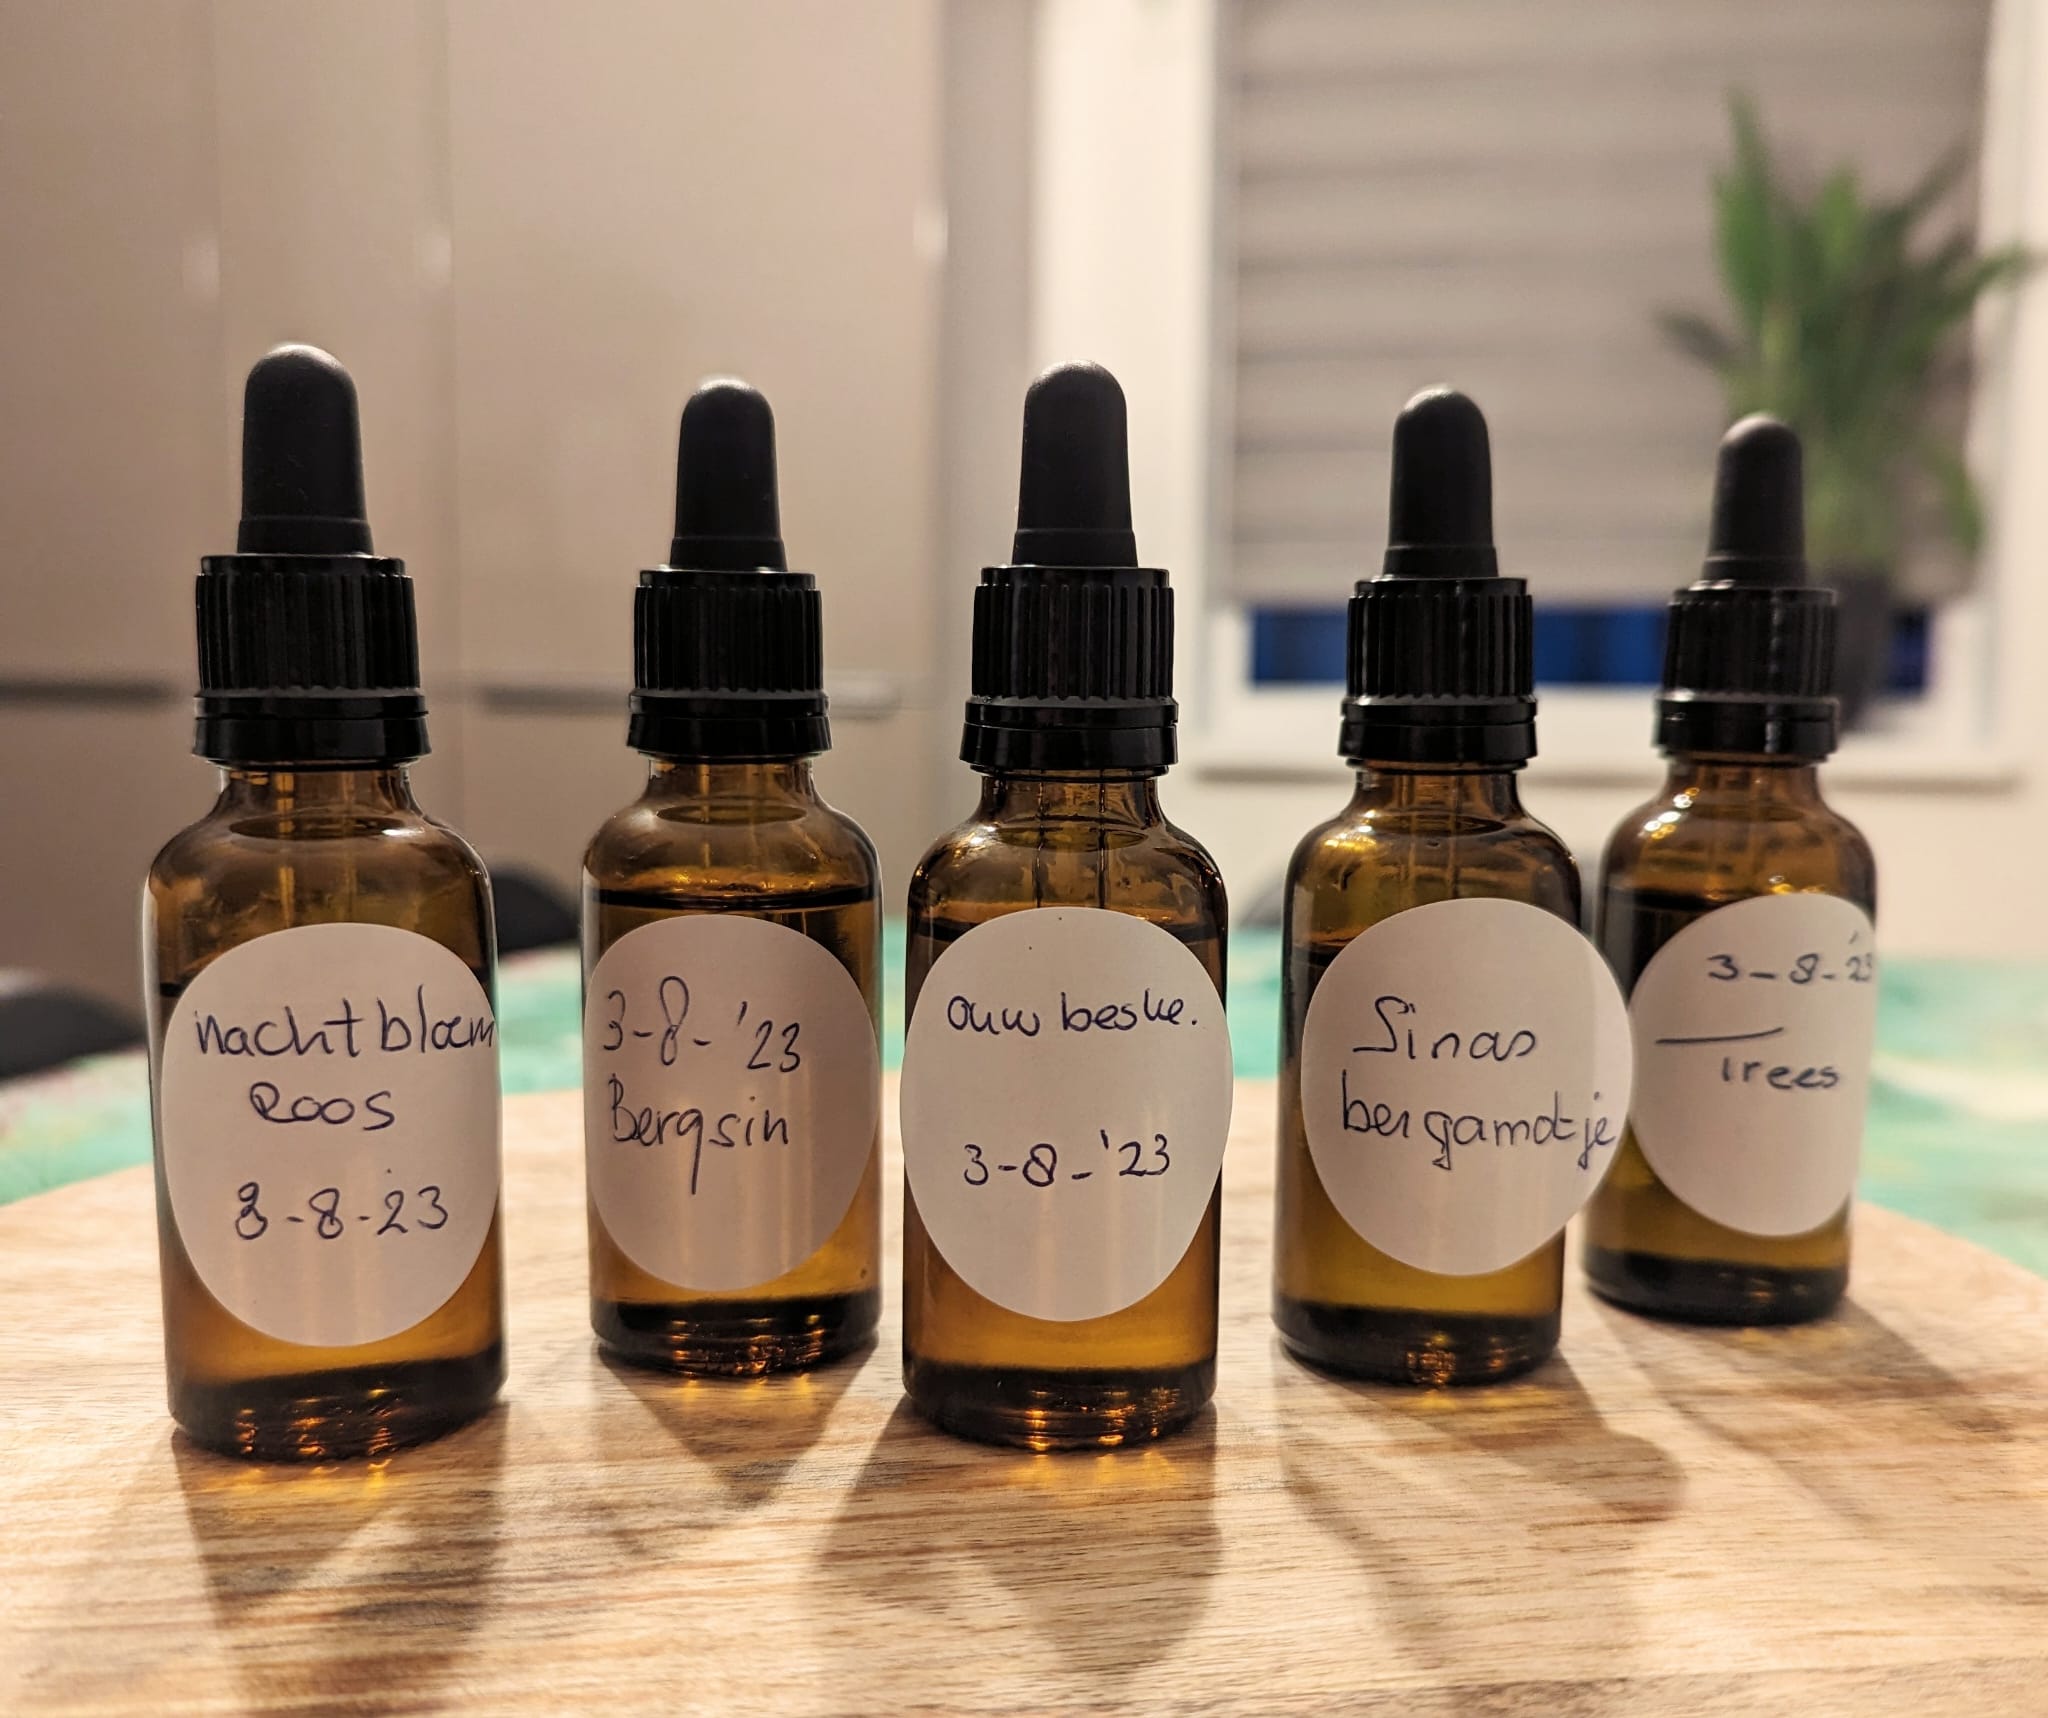 Workshop - Make your own Facial or Perfume Oil